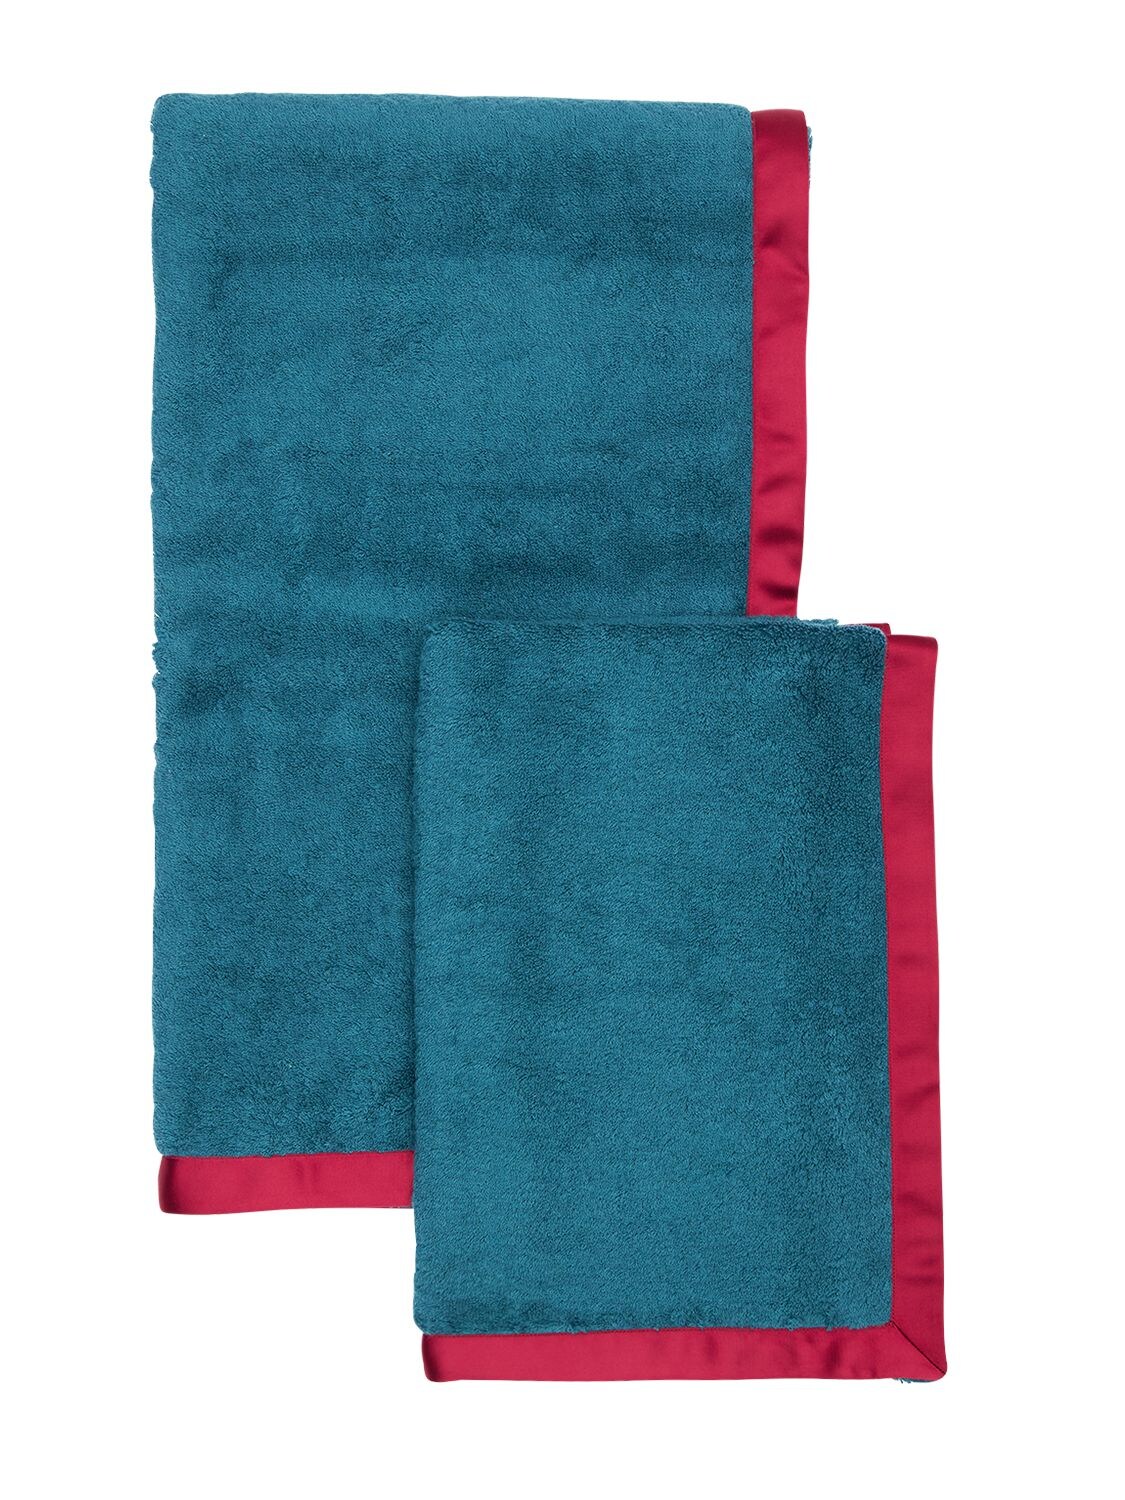 Alessandro Di Marco Set Of 2 Cotton Terrycloth Towels In Petrolblue,red